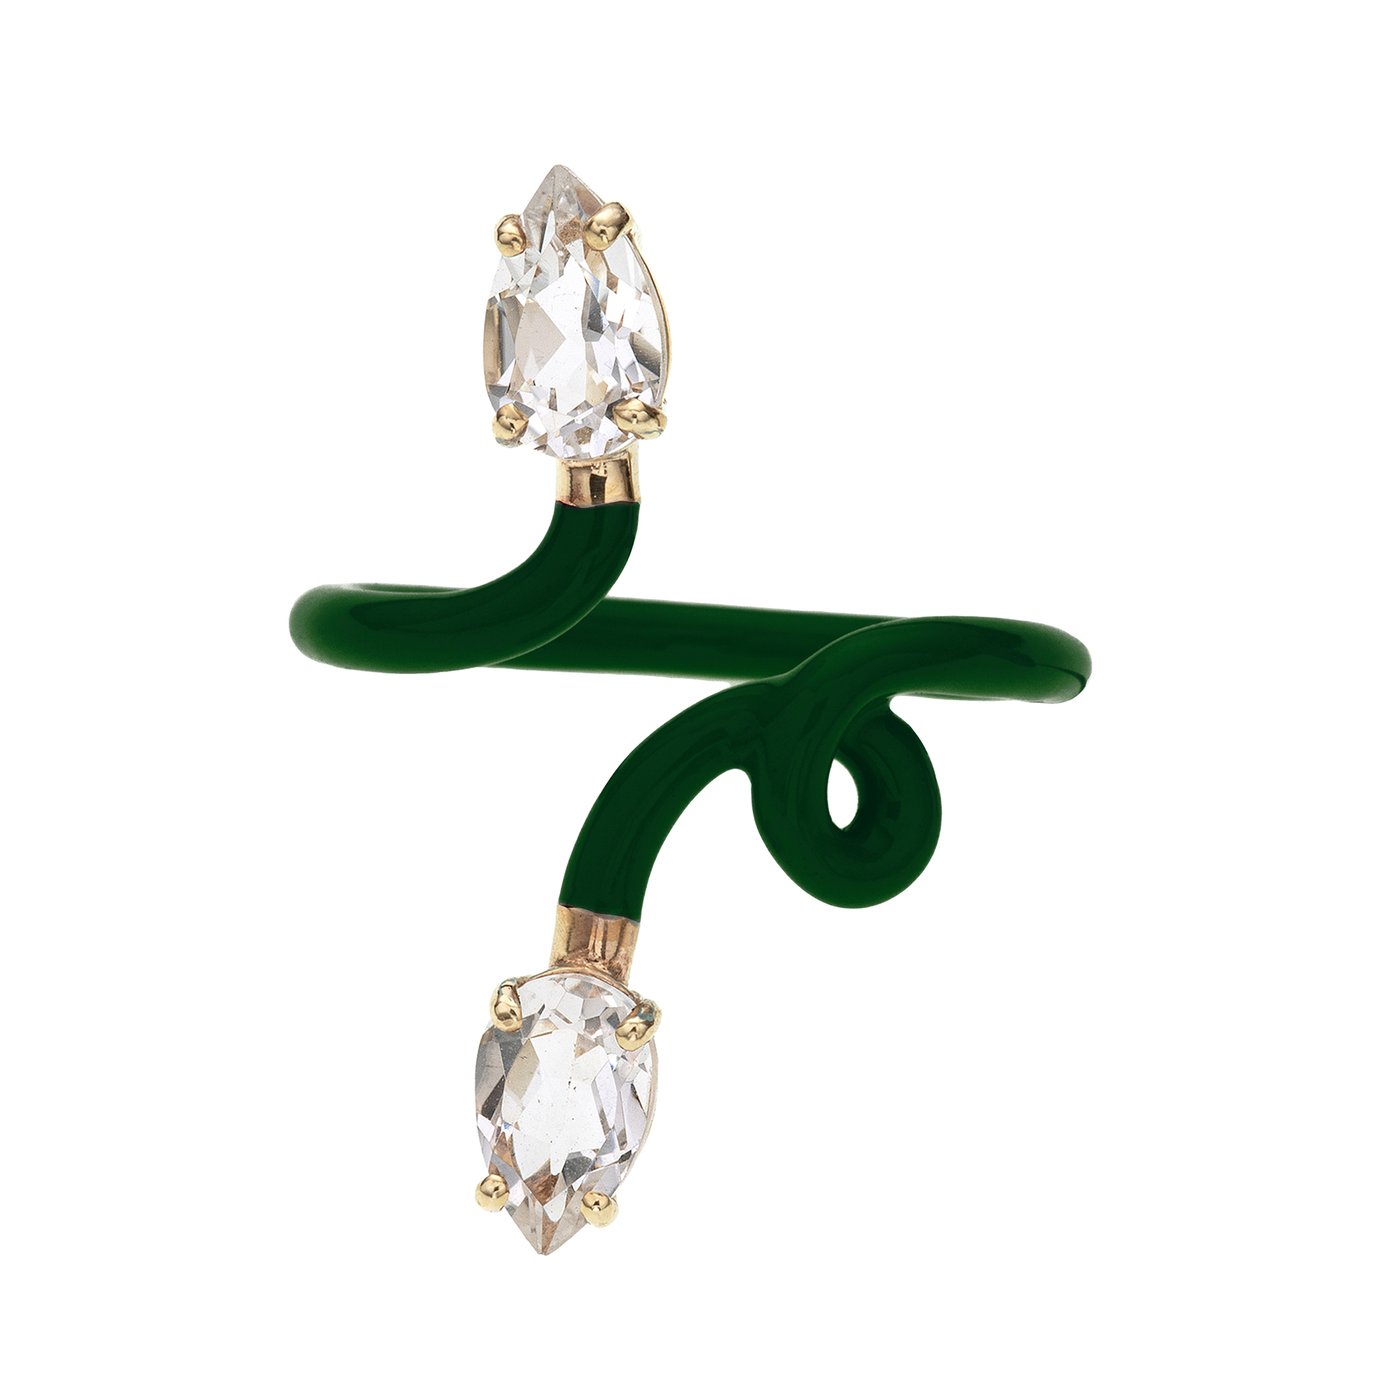 Bea Bongiasca Double Vine Tendril Ring with Emerald Green Enamel and Drop-Cut Rock Crystal